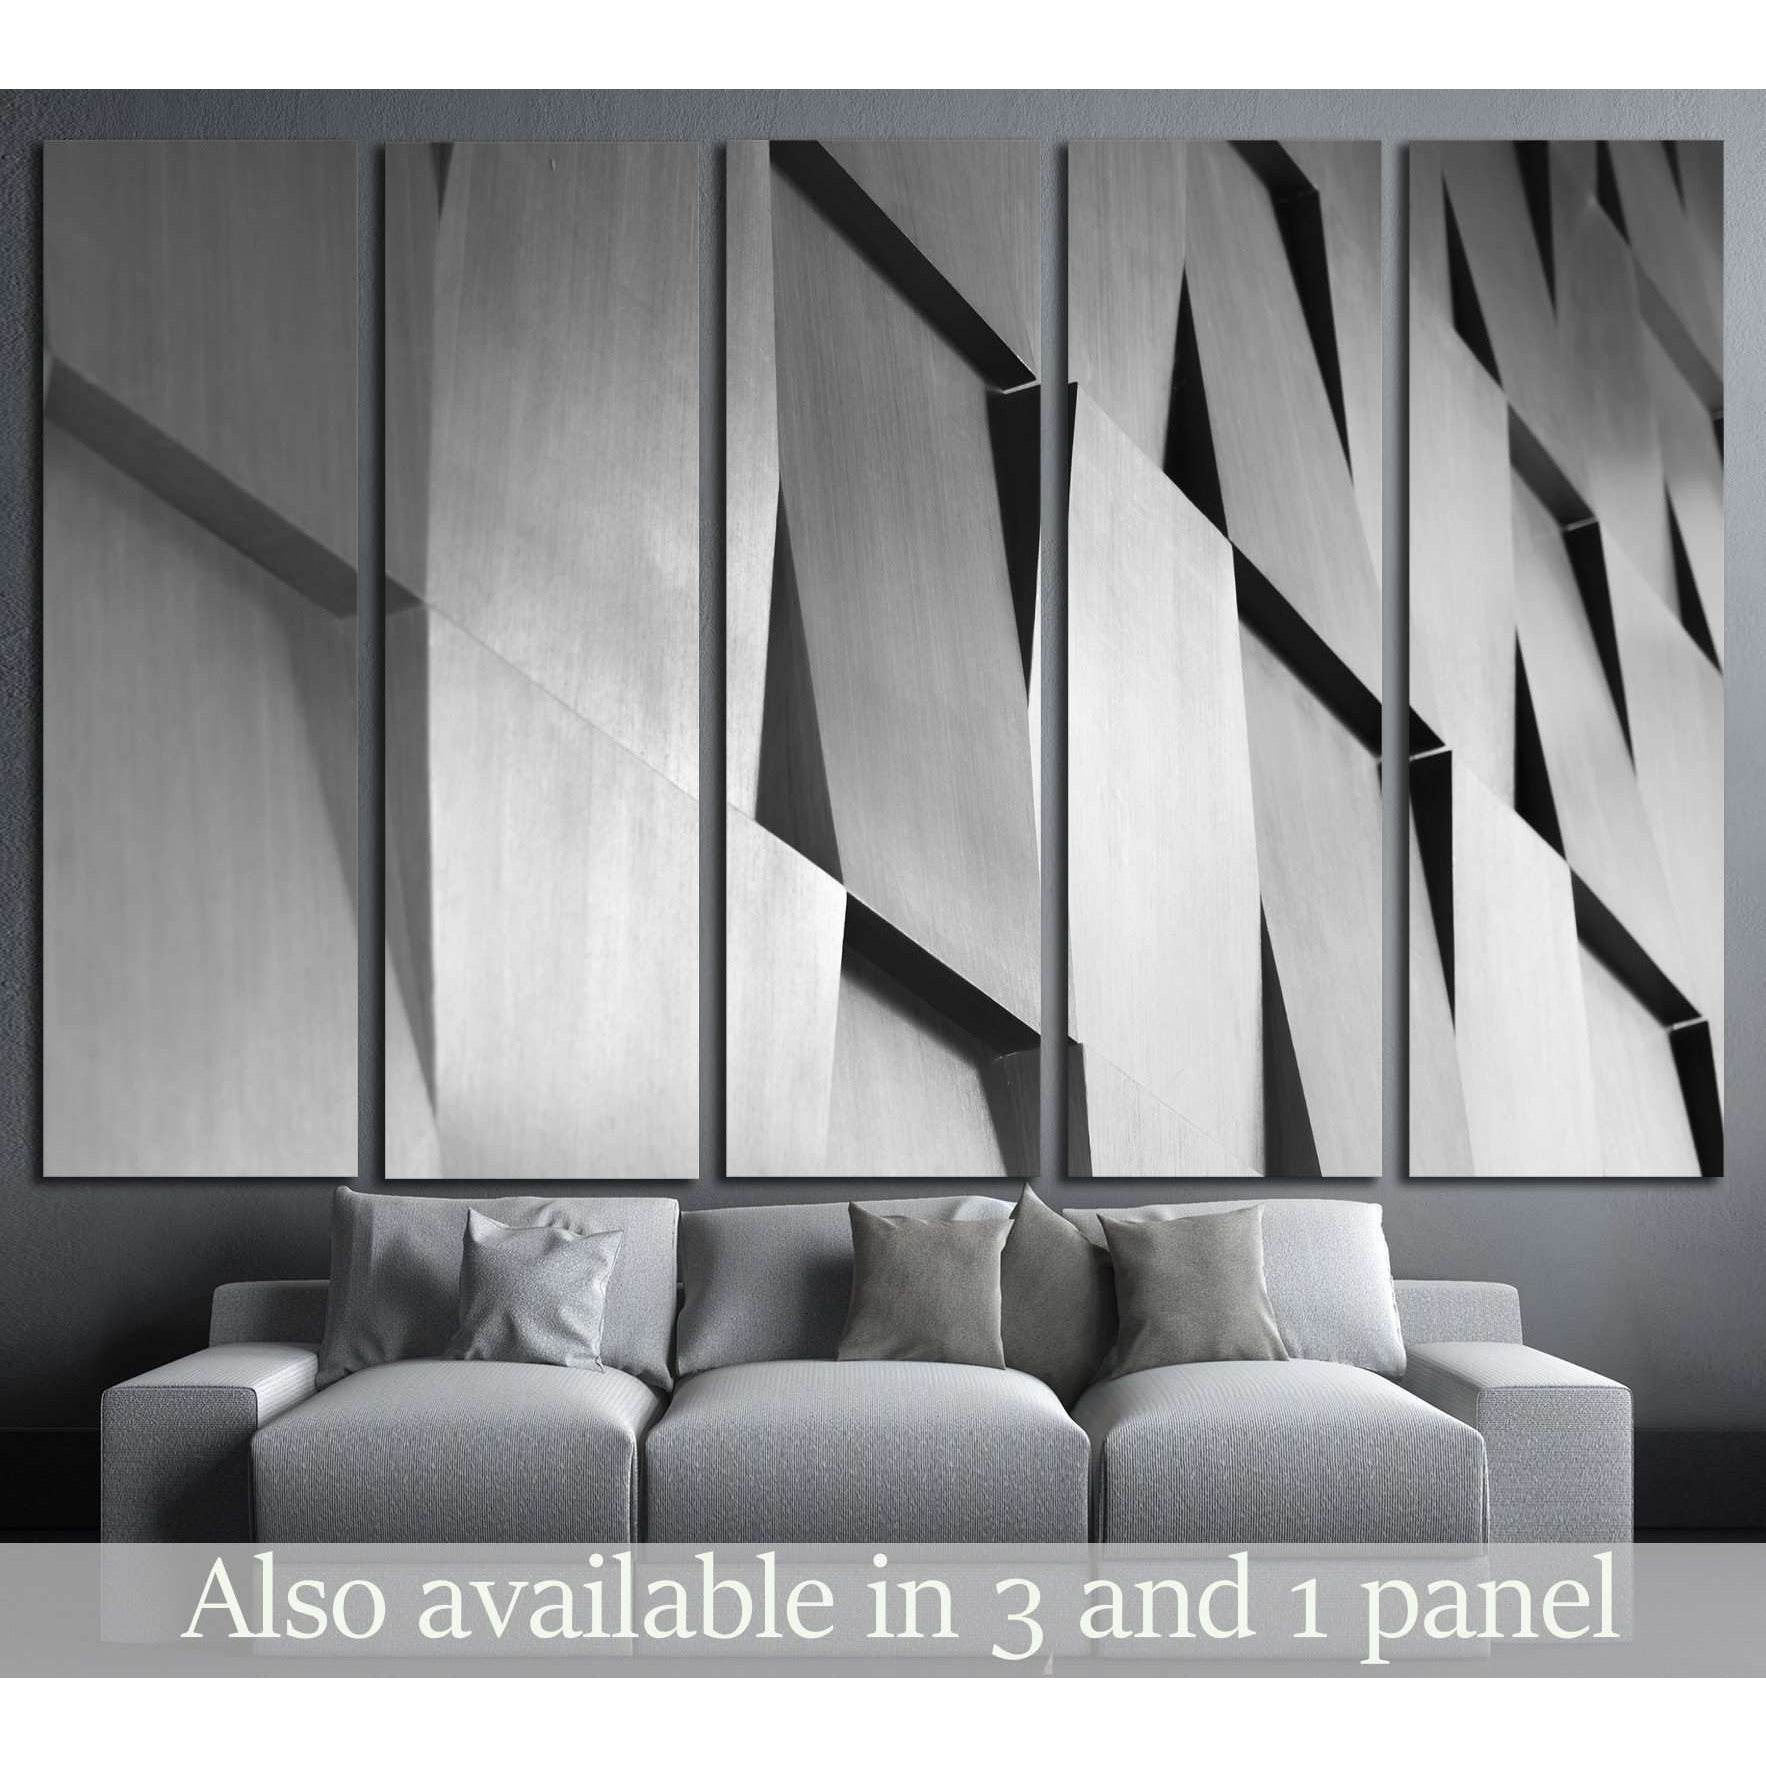 Wood wall geometry decoration background №1598 Ready to Hang Canvas Print